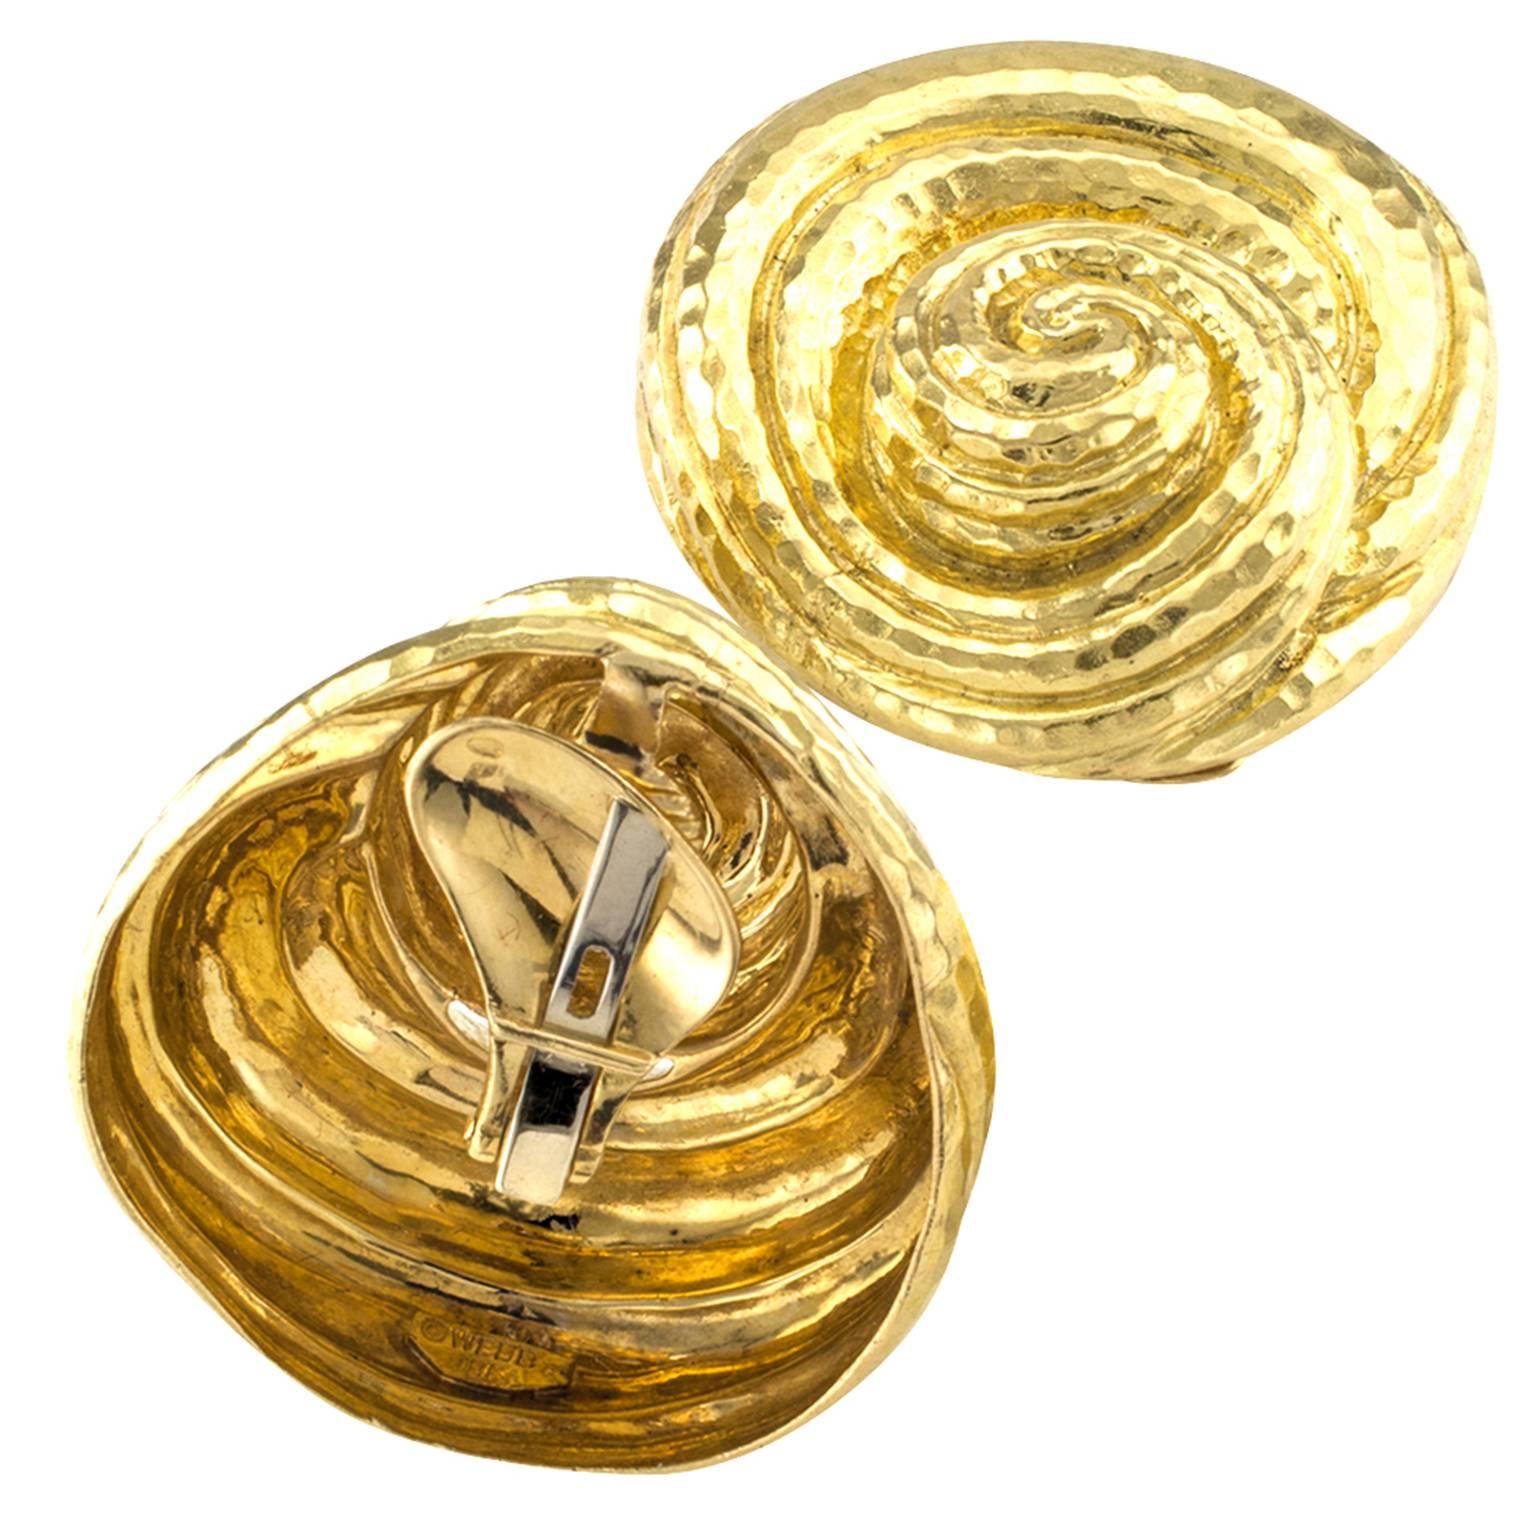 David Webb Estate Hammered Gold Earrings

These are definitely WOW, WOW, WOW  great earrings by David Webb.  Measuring approximately 1 5/8  by 1 7/16 inches overall, they will get noticed!  Elegant, sophisticated, forever fashionable and delicious